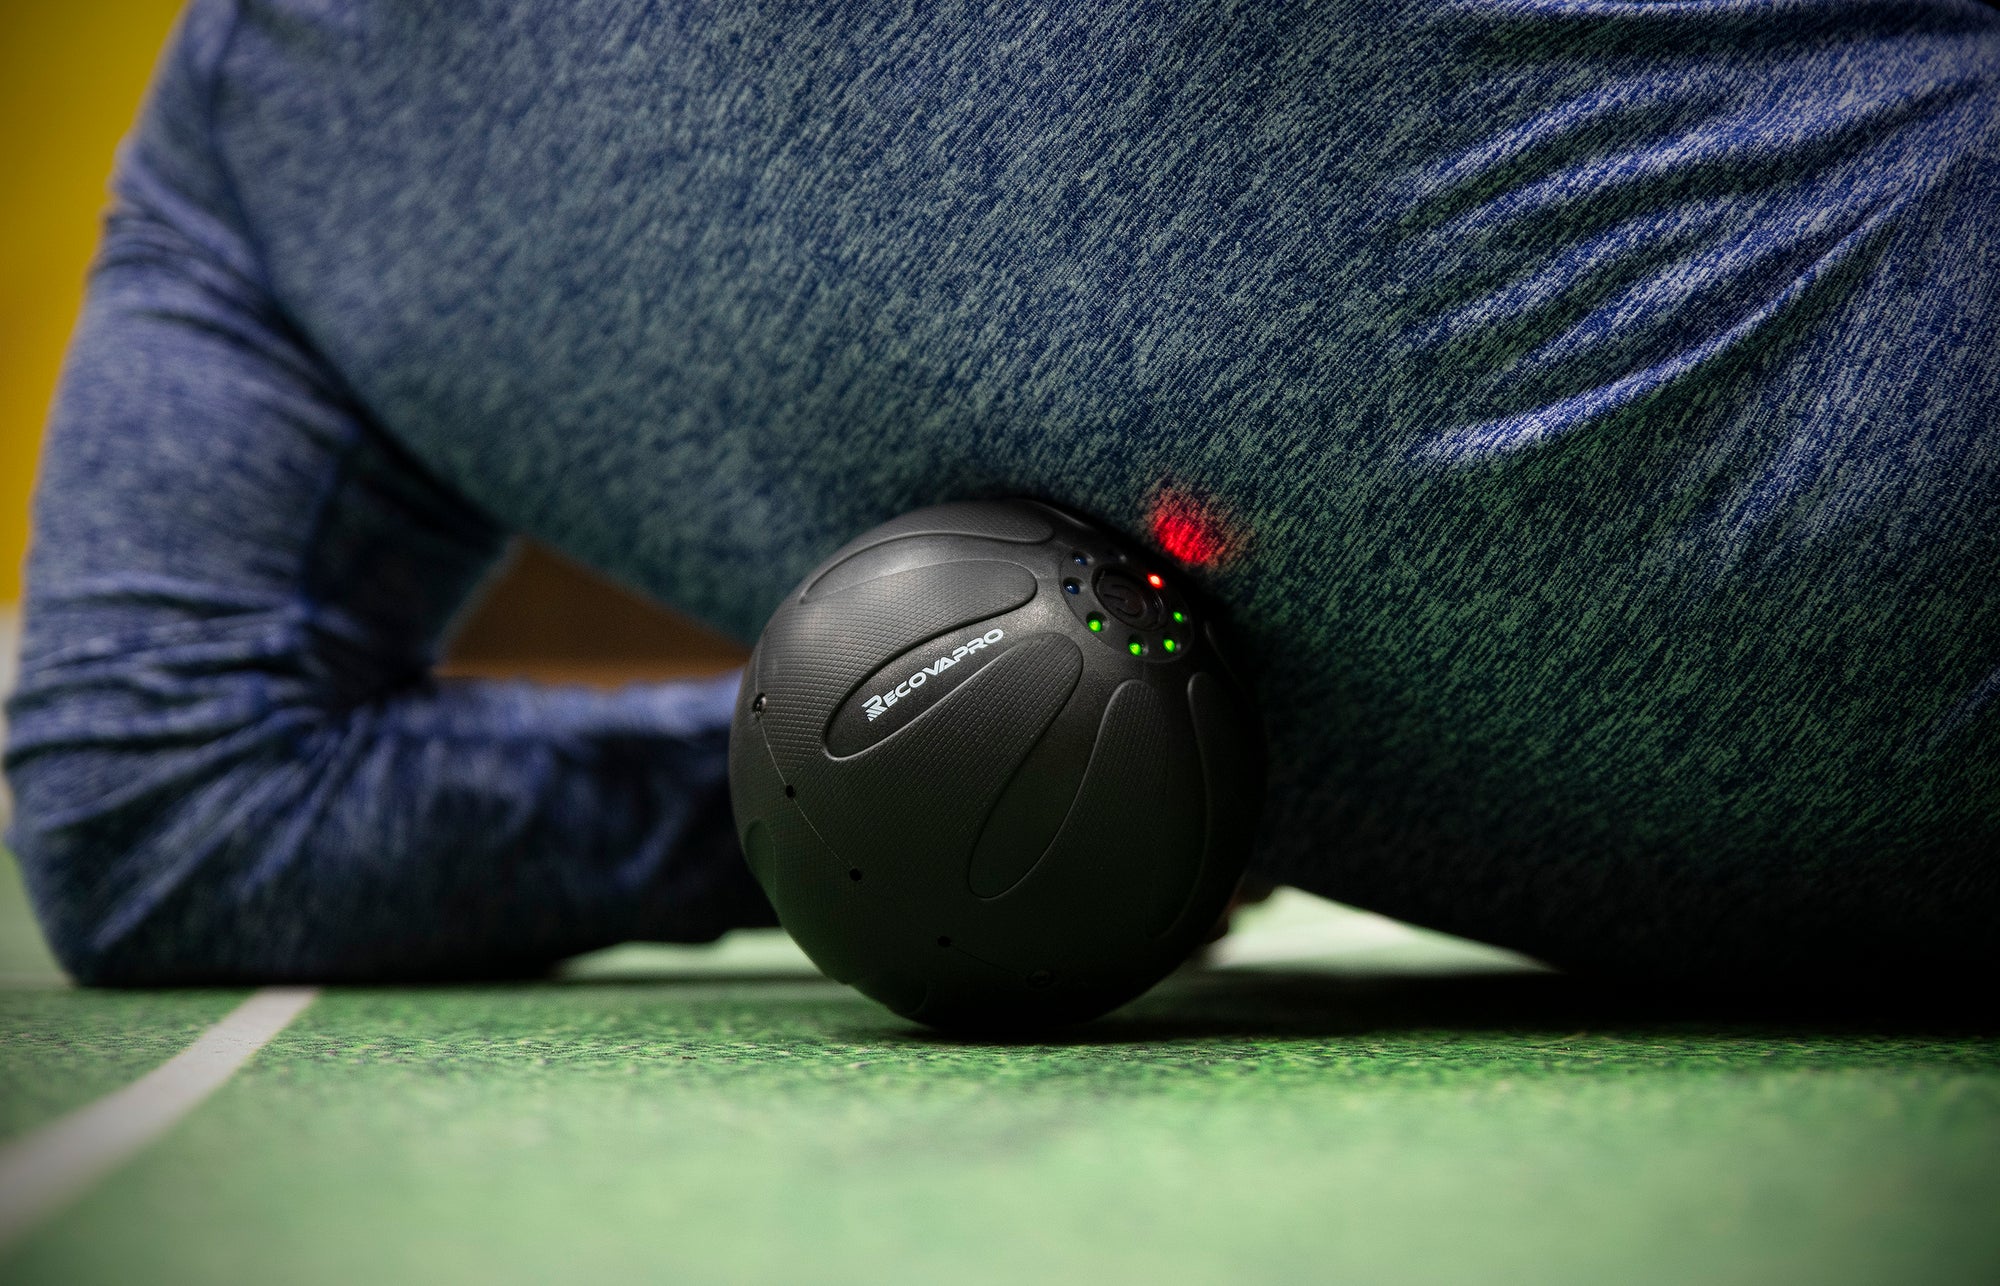 HOW TO USE THE RECOVABALL ON MYOFASCIAL PAIN SYNDROME AND FIBROMYALGIA